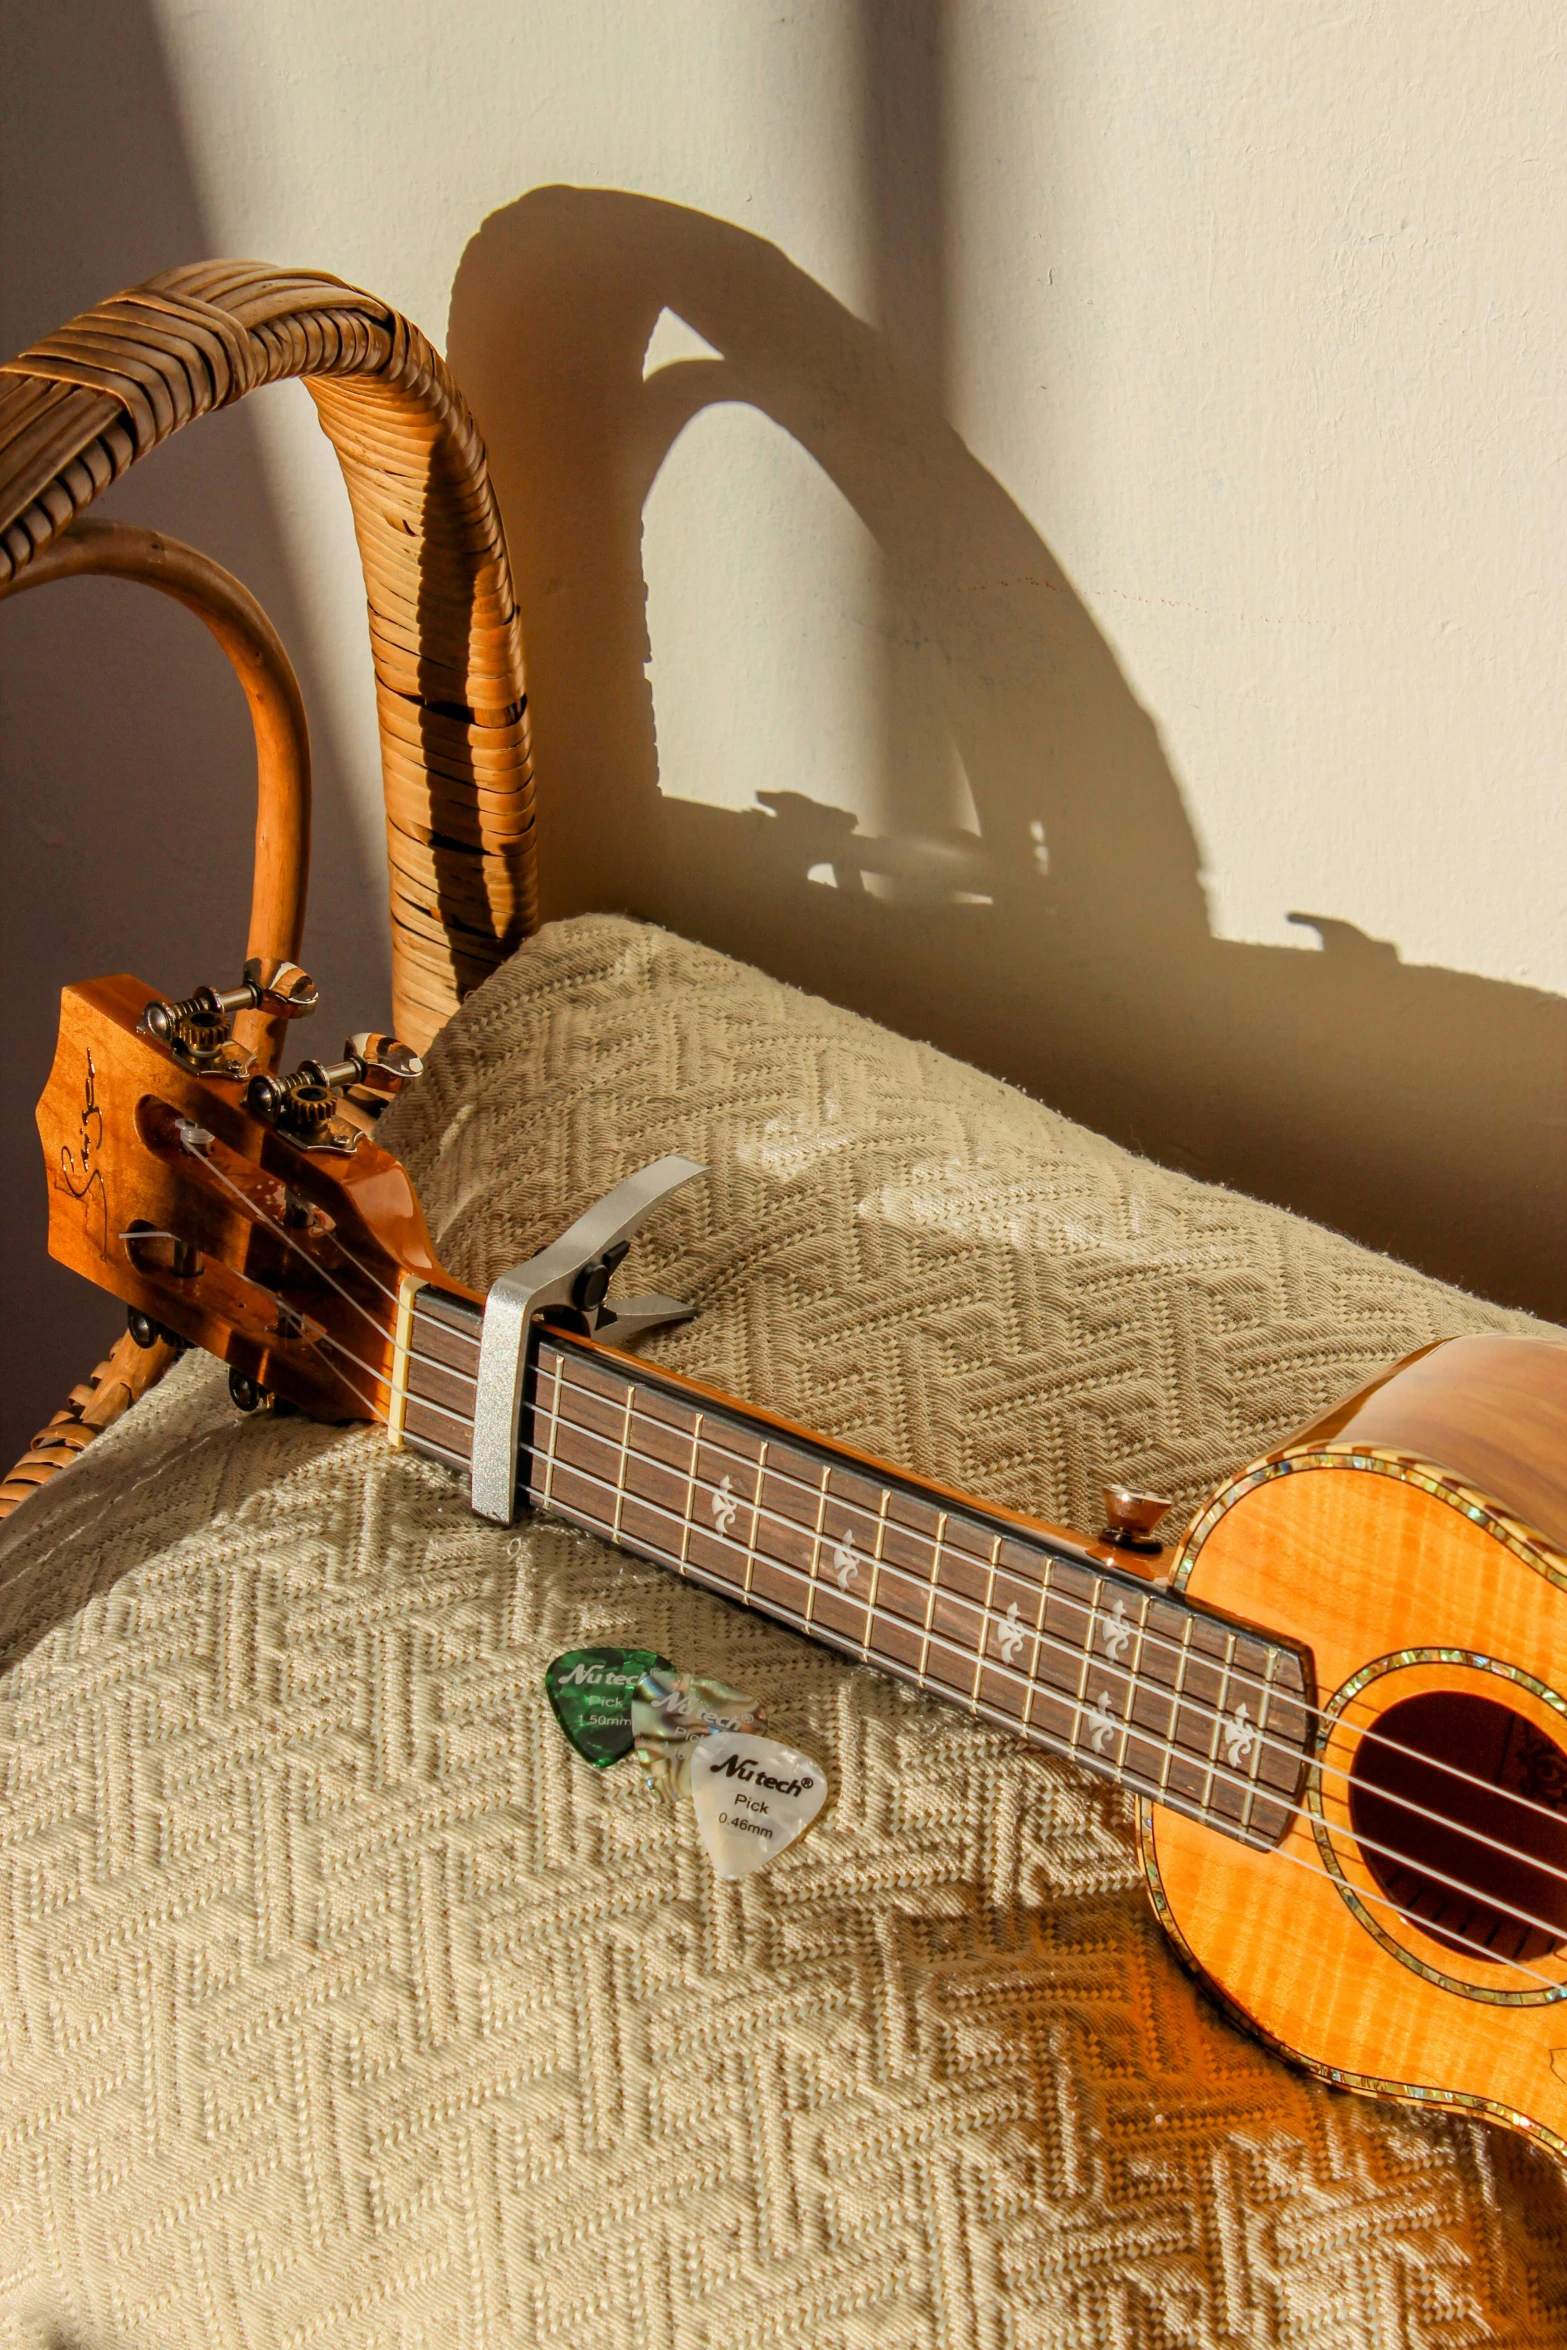 a guitar and a wicker basket laying on the bed